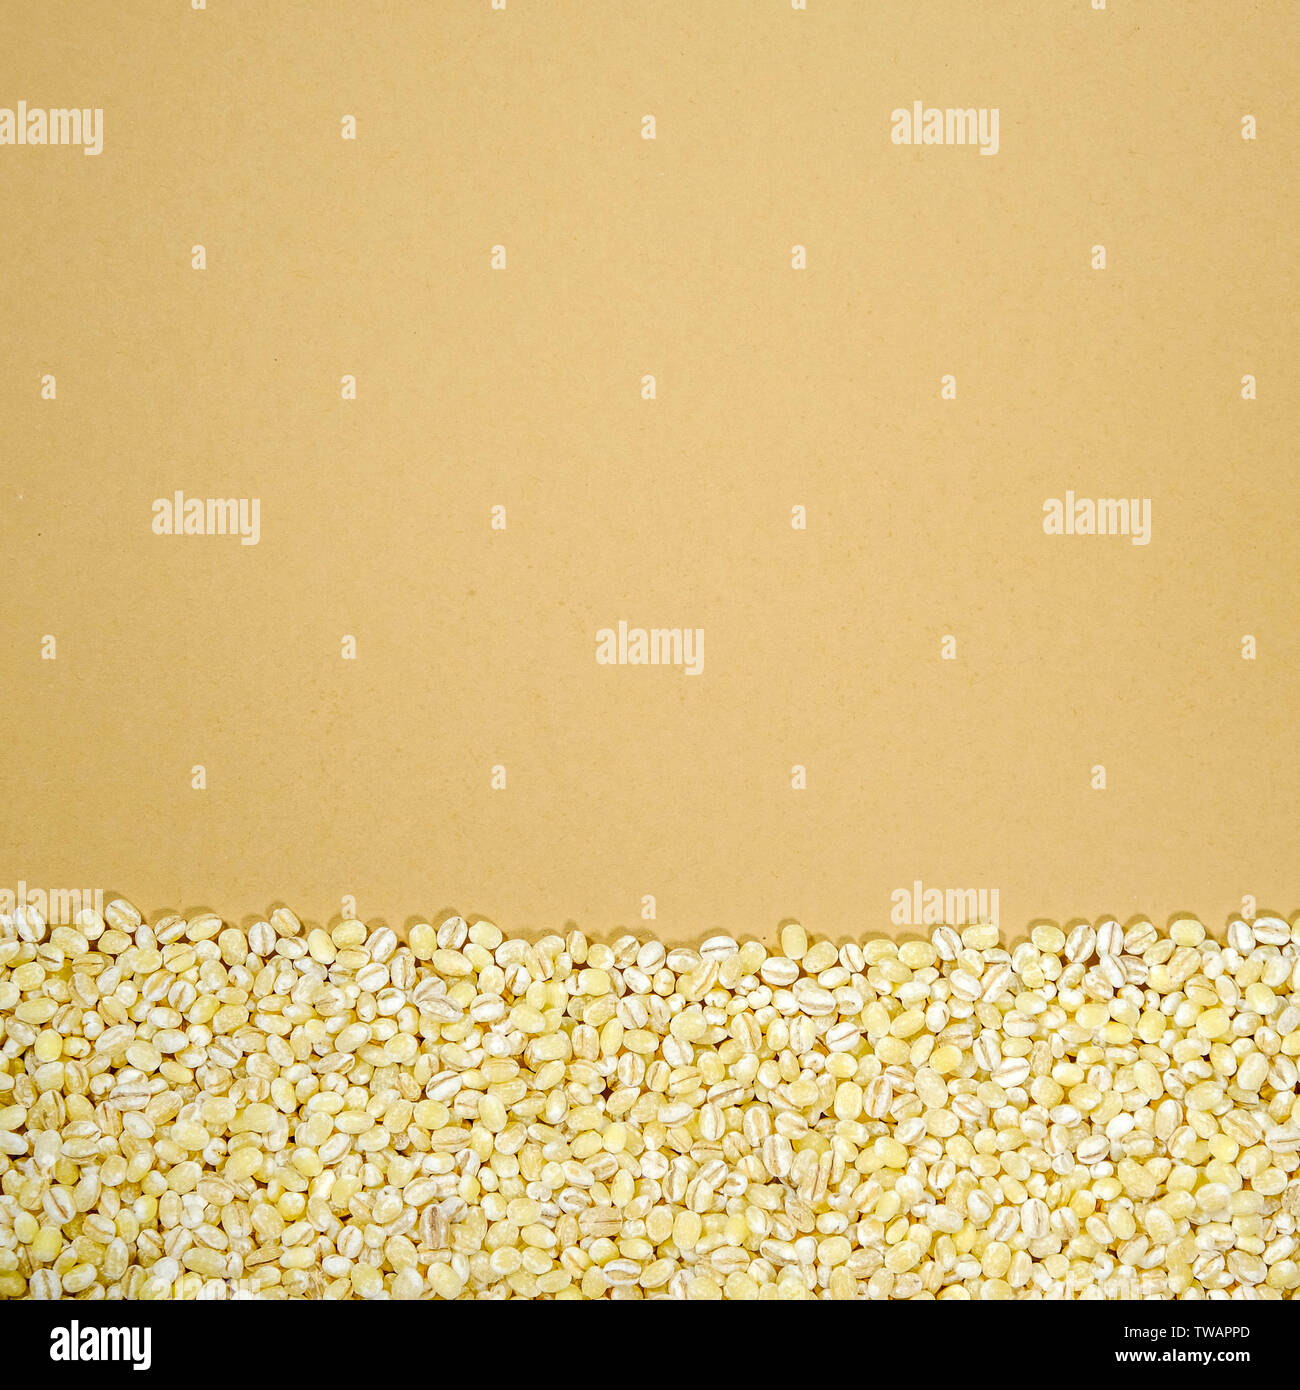 Pearl Barley Healthy Super Food Seeds or Grain With No People and Copy Space Stock Photo